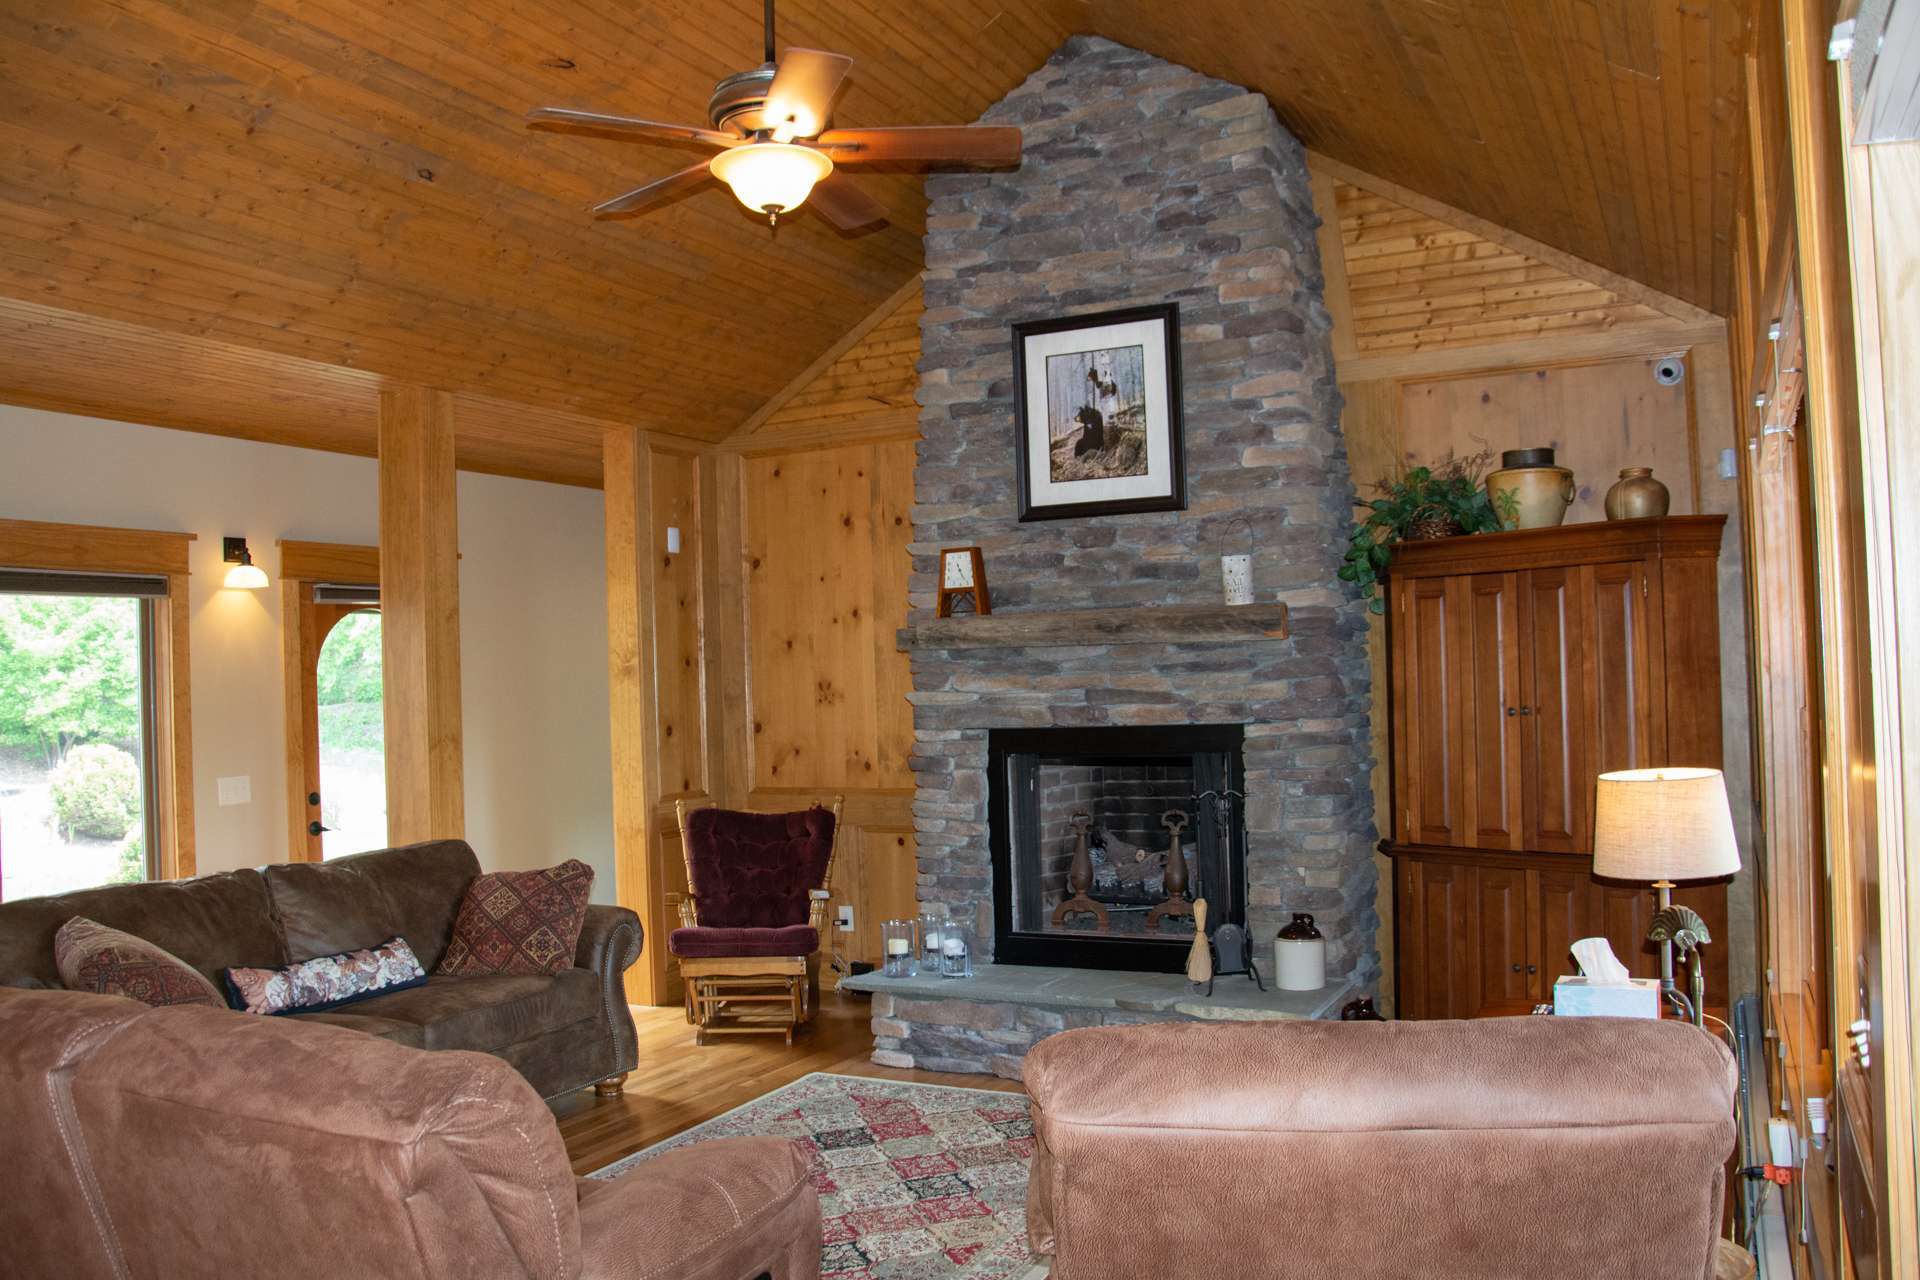 Entertain in grand style in the oversized living room graced by soaring vaulted wood ceiling and cozy floor to ceiling stone fireplace, currently with gas logs.